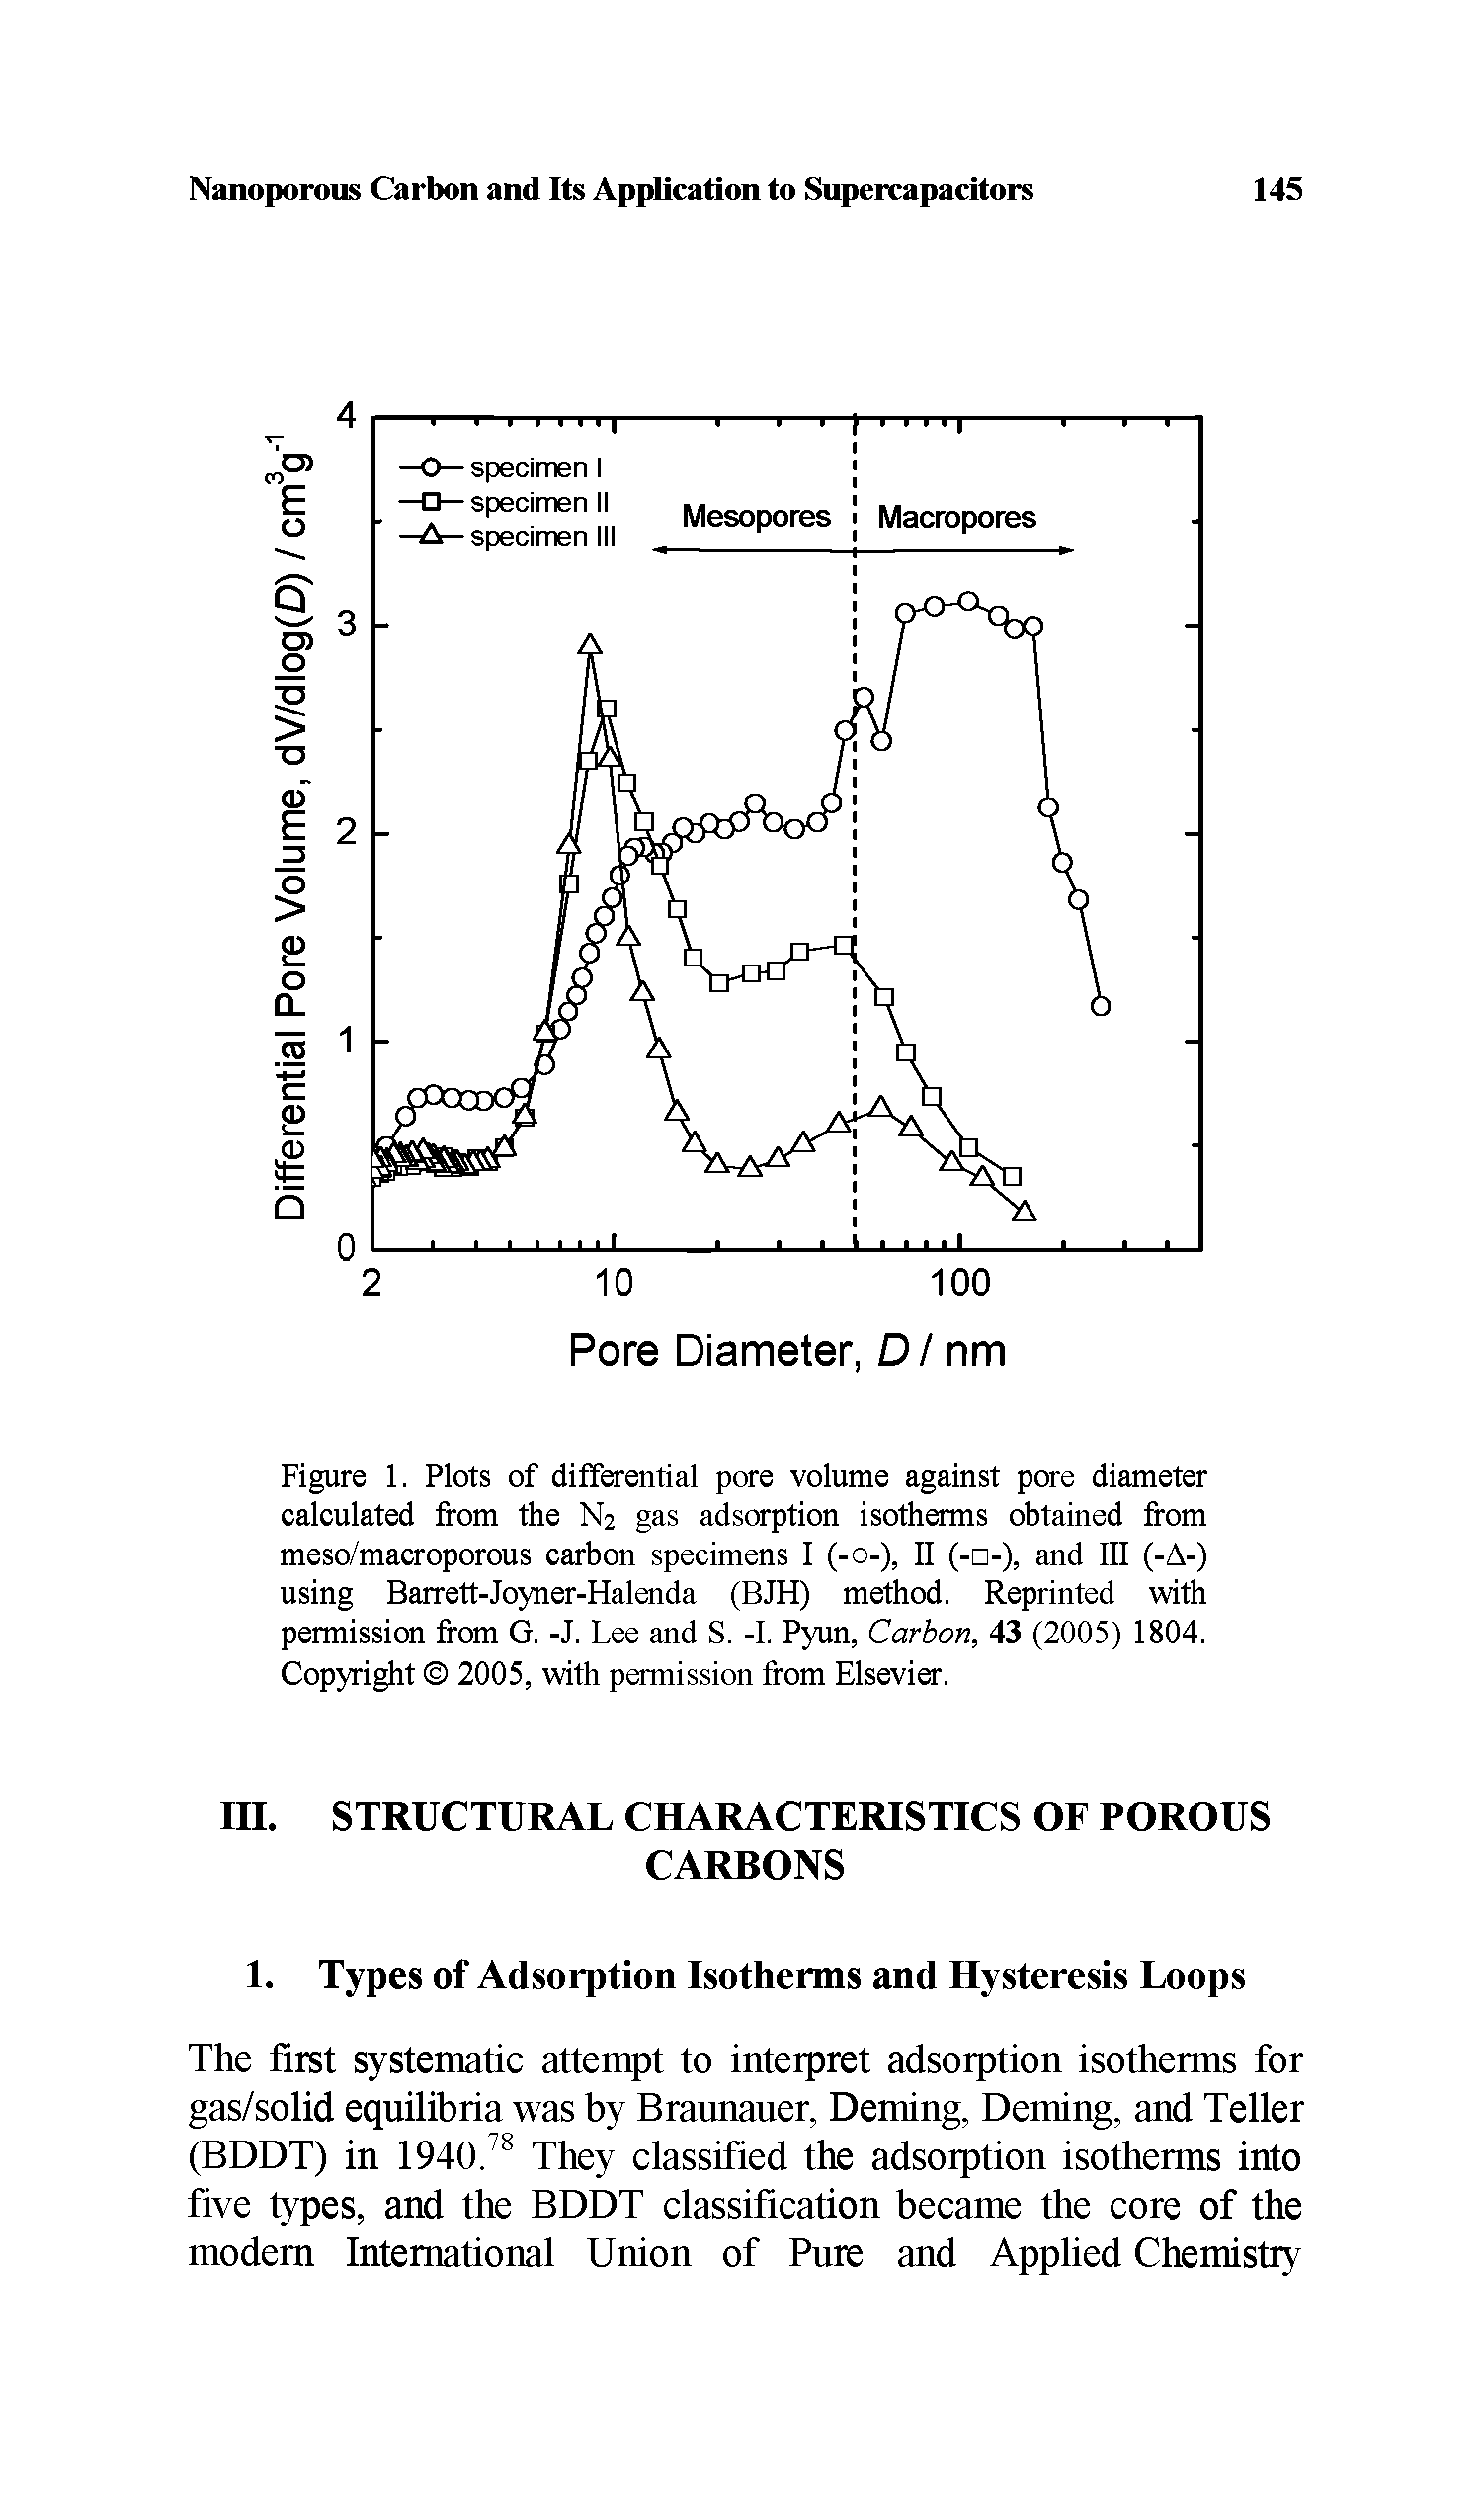 Figure 1. Plots of differential pore volume against pore diameter calculated from the N2 gas adsorption isotherms obtained from meso/macroporous carbon specimens I (-0-), II (- -), and III (-A-) using Barrett-Joyner-Halenda (BJH) method. Reprinted with permission from G. -J. Lee and S. -I. Pyun, Carbon, 43 (2005) 1804. Copyright 2005, with permission from Elsevier.